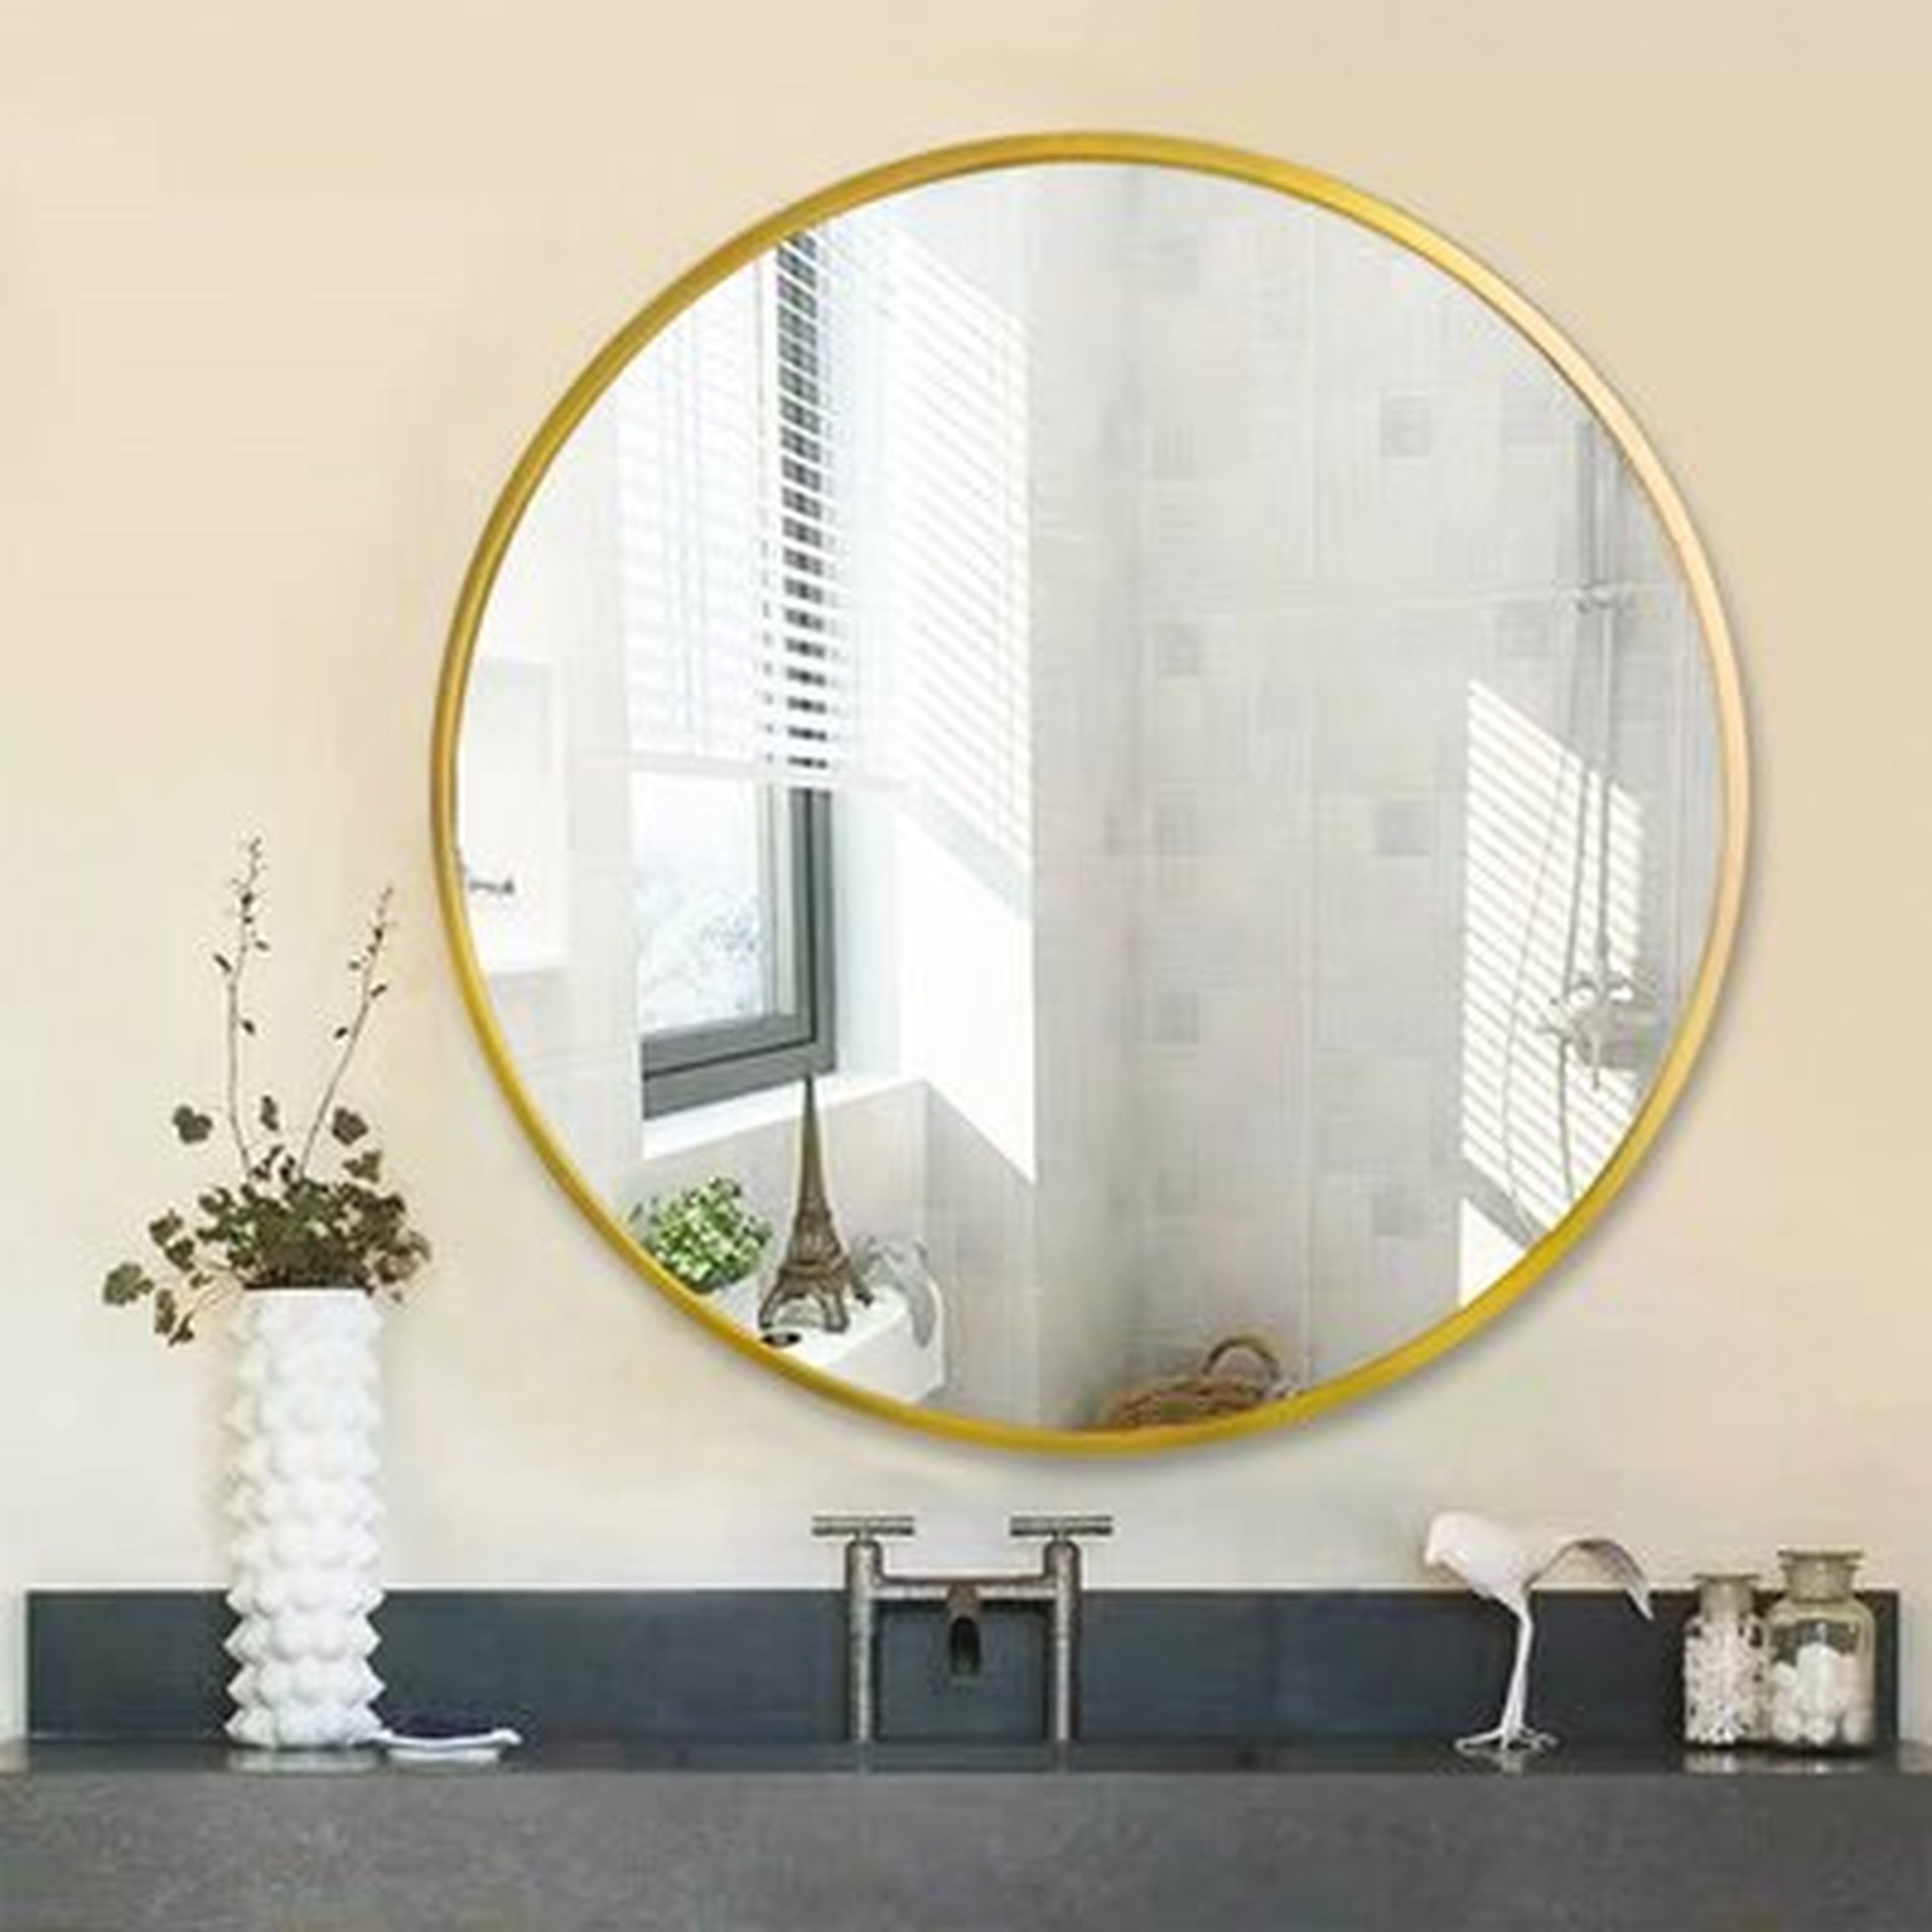 32 Inch Classic Metal Frame Circle Mirror,With An Alloy Metal Sleek Frame, Floating Round Glass Panel,Black - Wayfair